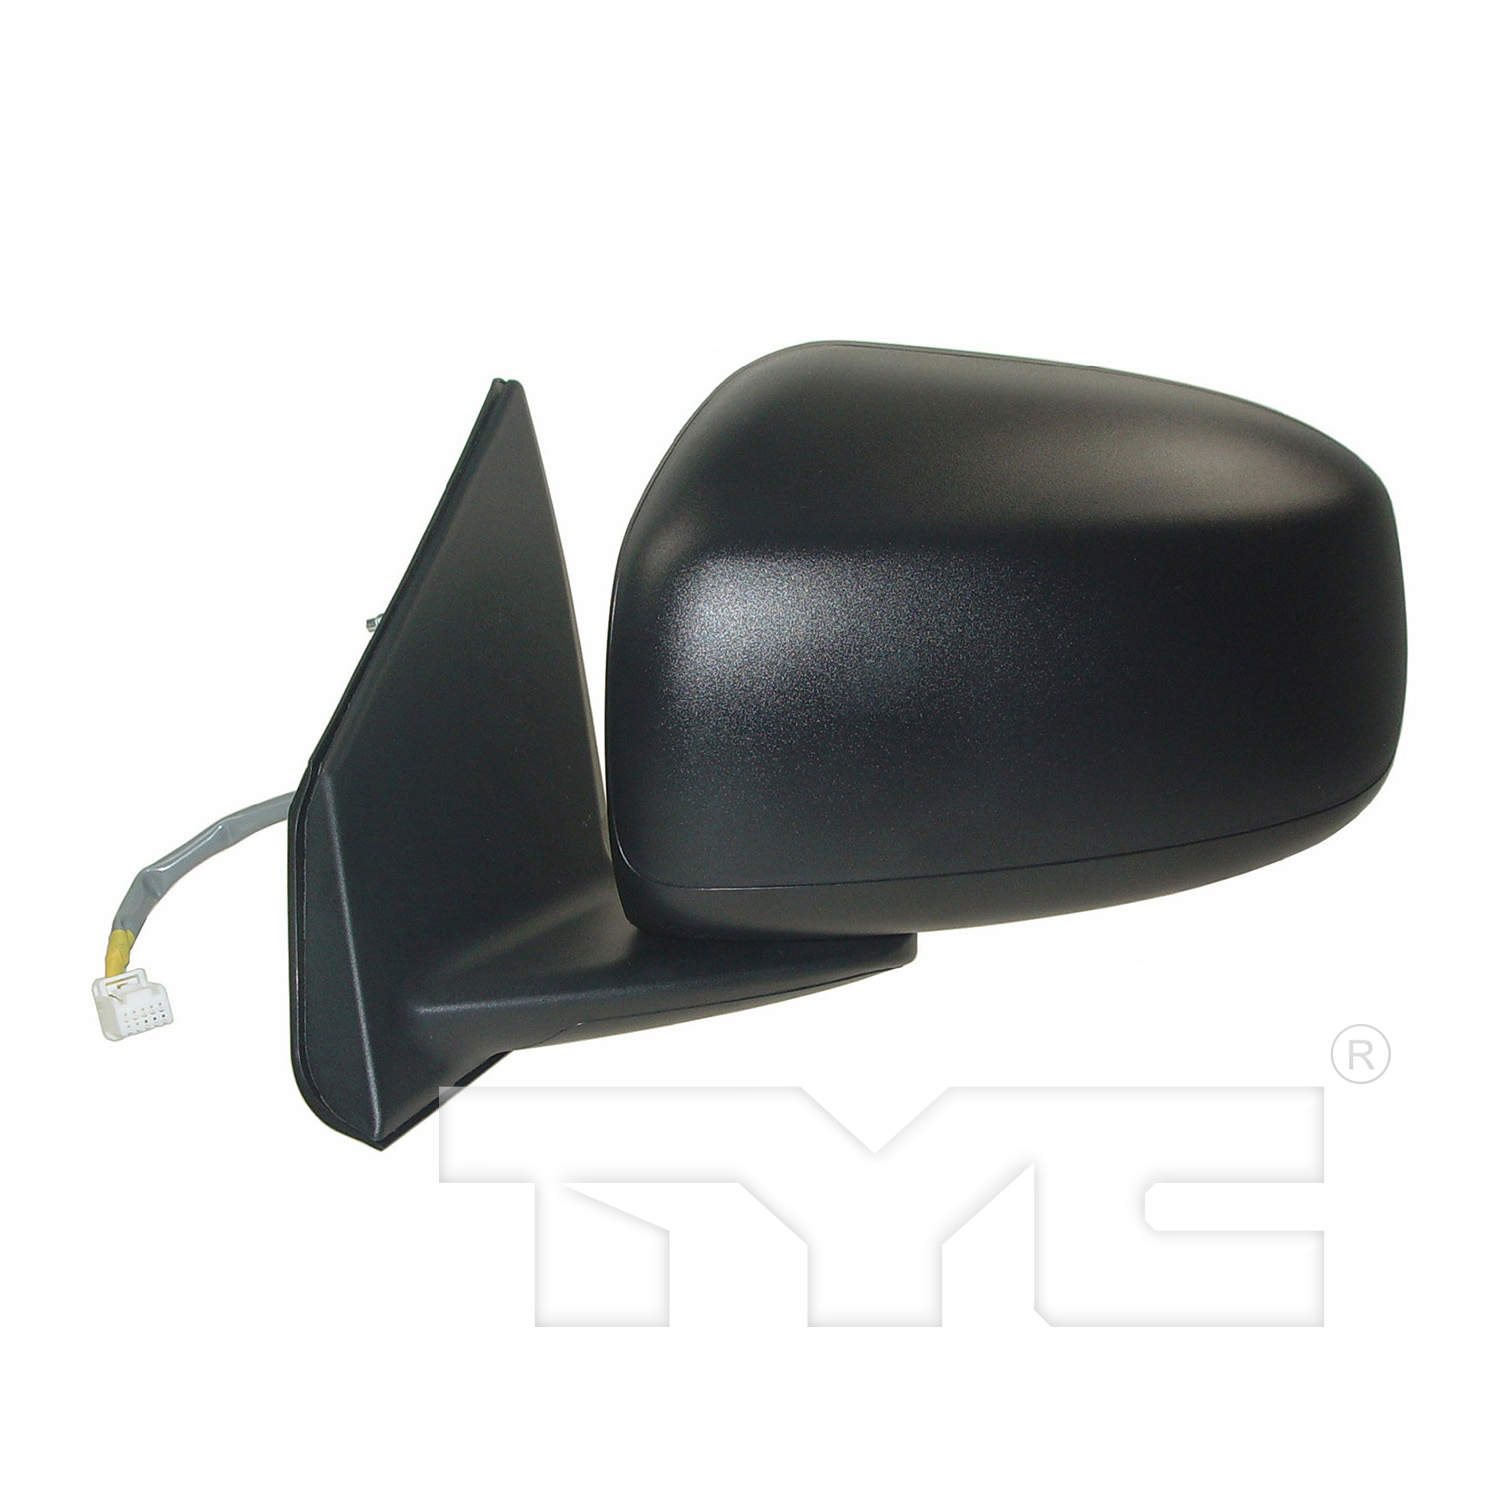 Aftermarket MIRRORS for MITSUBISHI - LANCER, LANCER,15-16,LT Mirror outside rear view